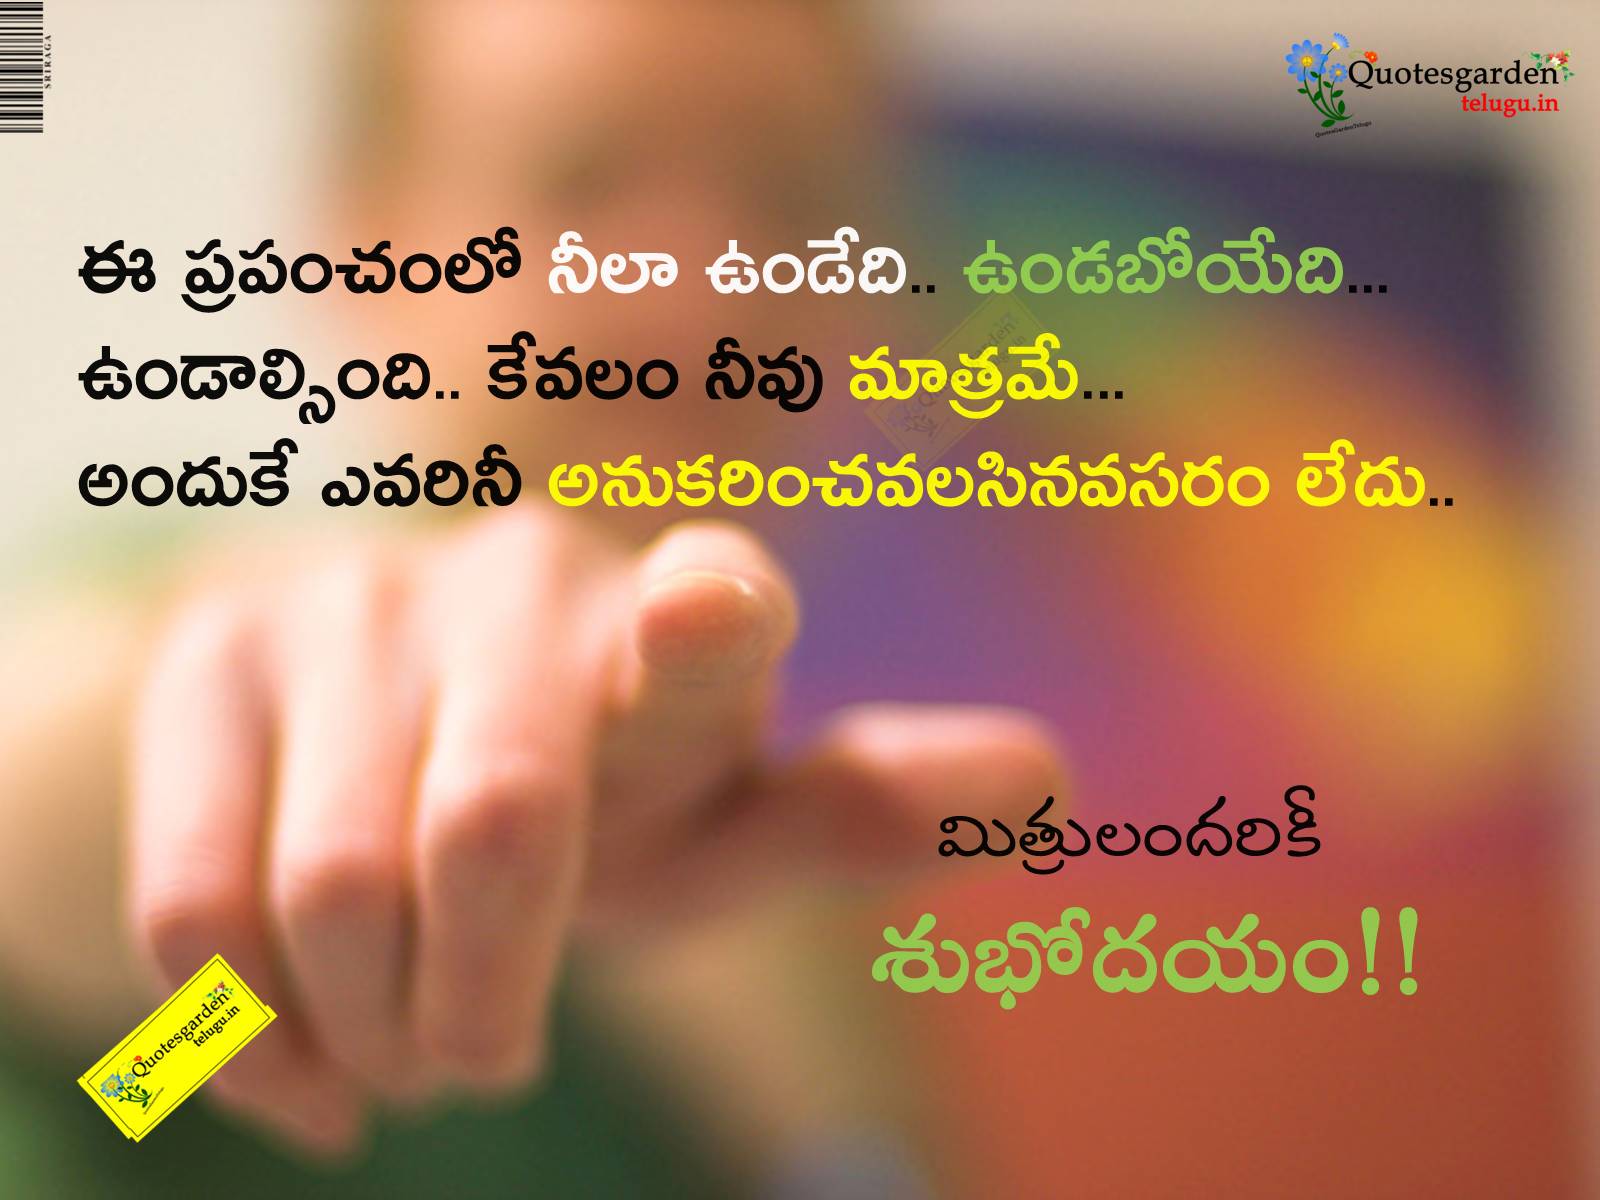 good morning quotes messages Best inspirational Quotes Best Quotes about life Best Telugu Quotes